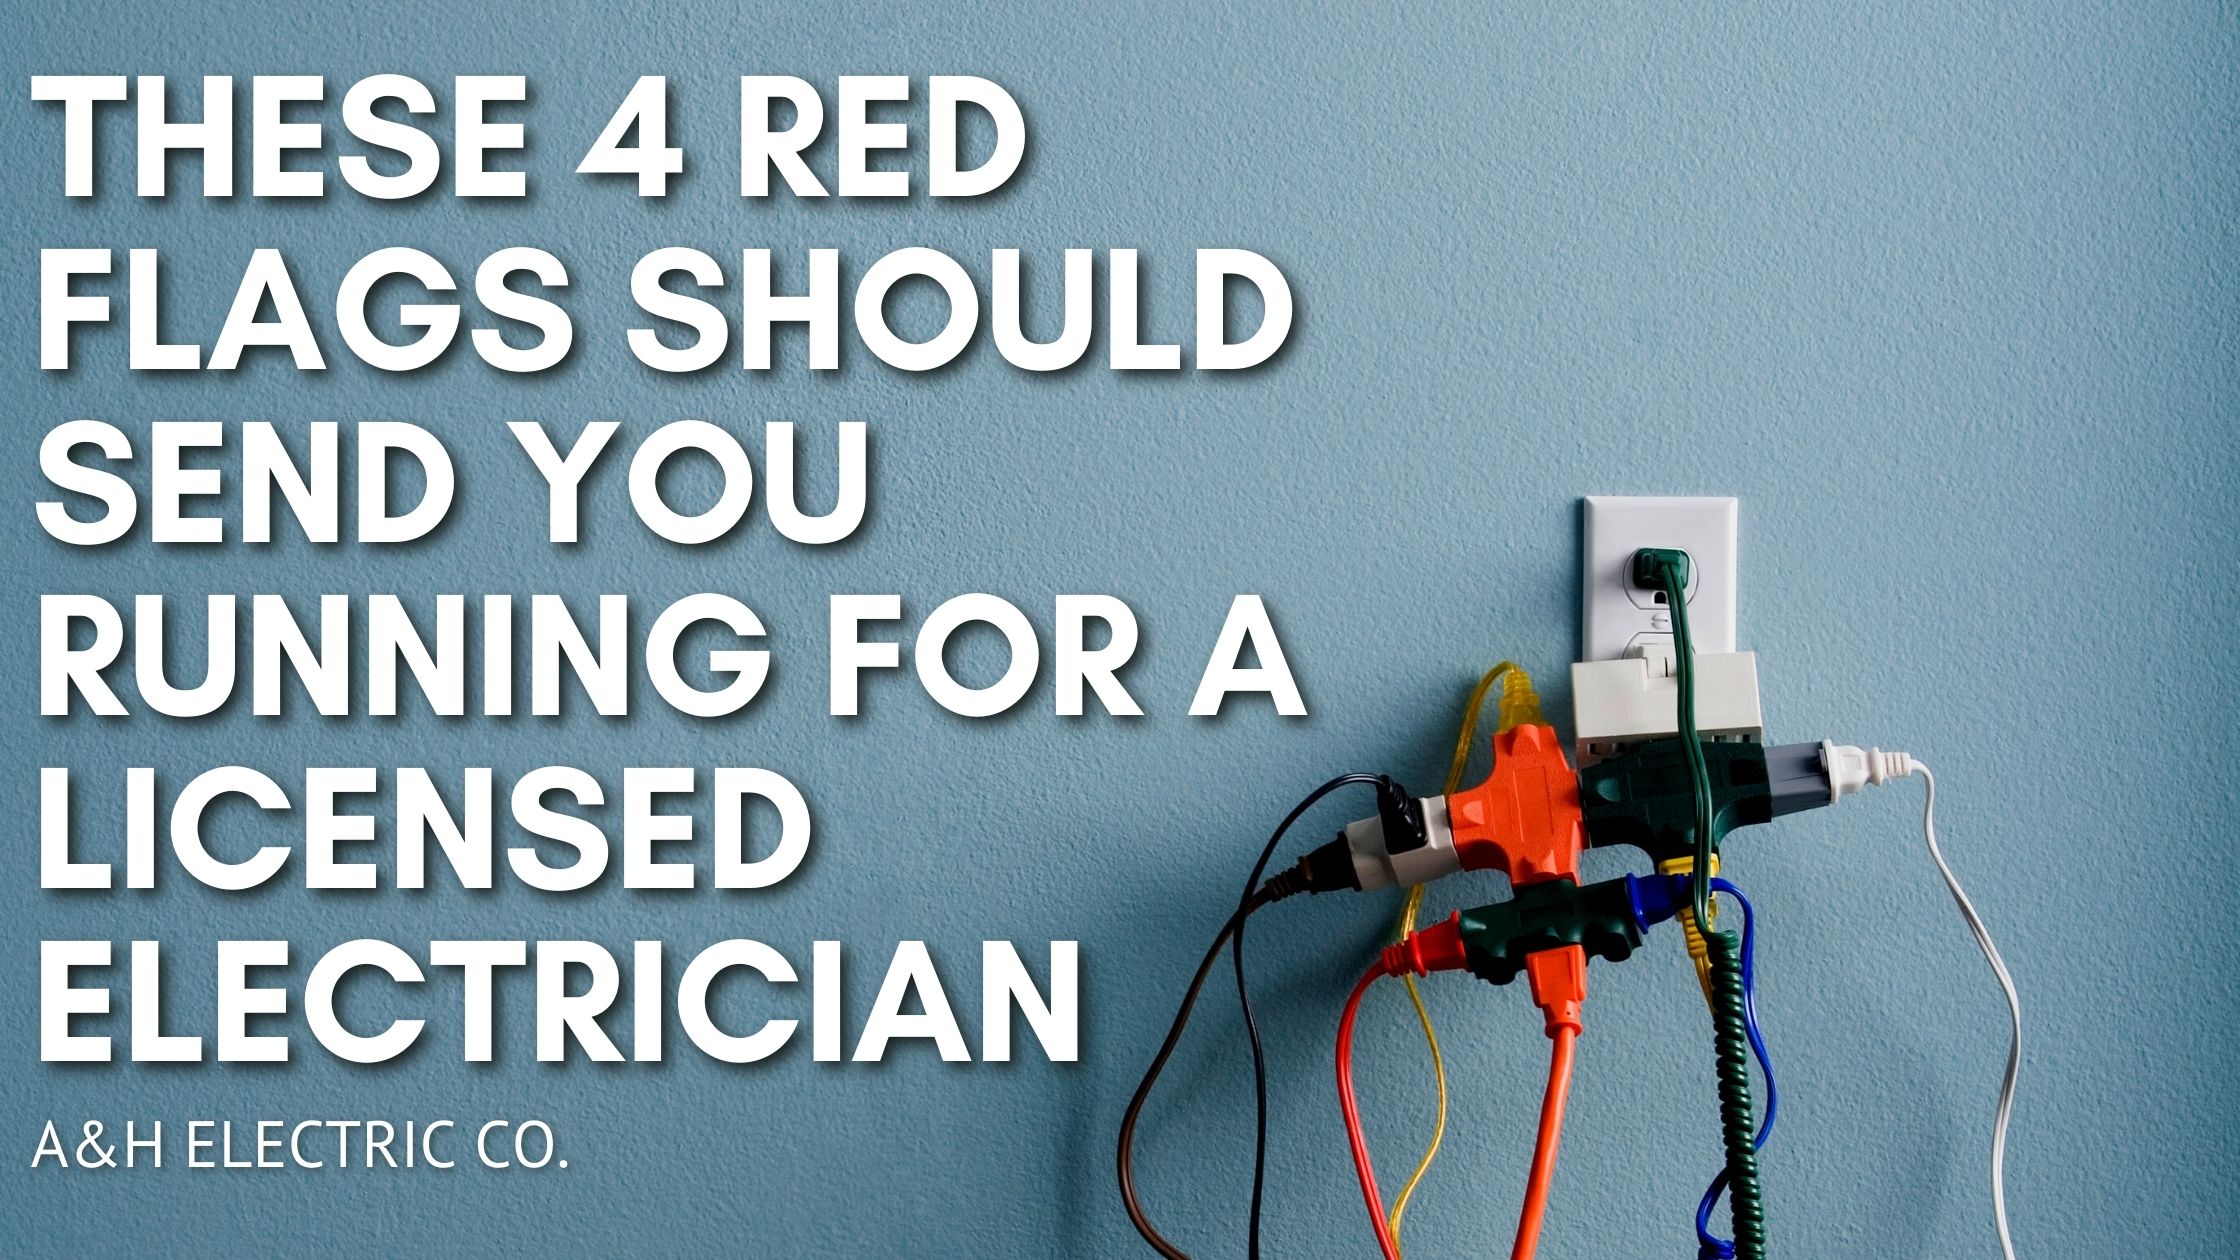 These 4 Red Flags Should Send You Running for a Licensed Electrician